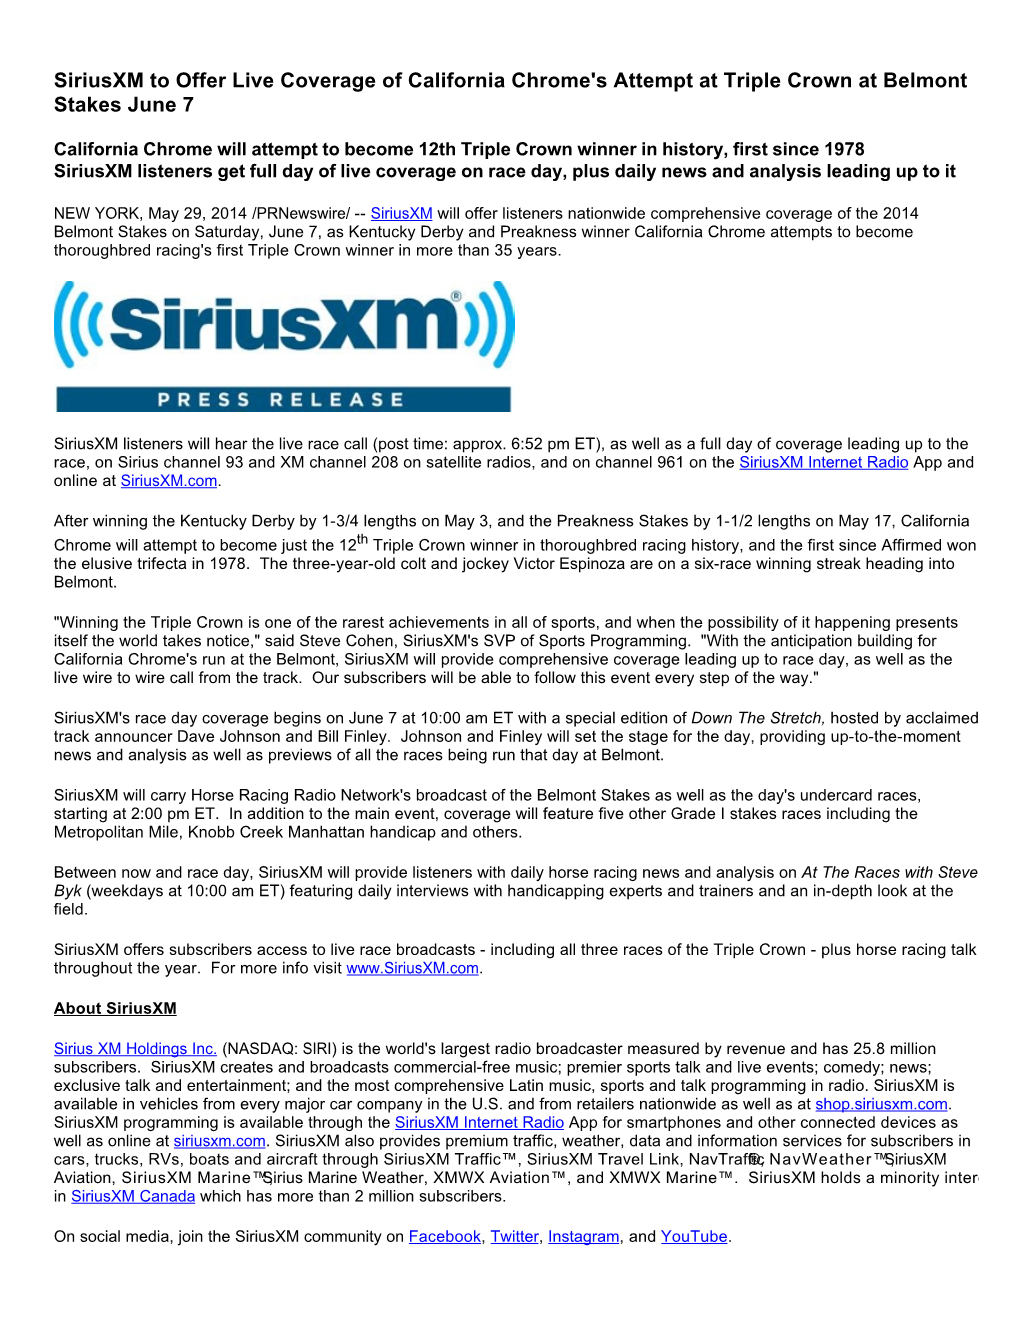 Siriusxm to Offer Live Coverage of California Chrome's Attempt at Triple Crown at Belmont Stakes June 7